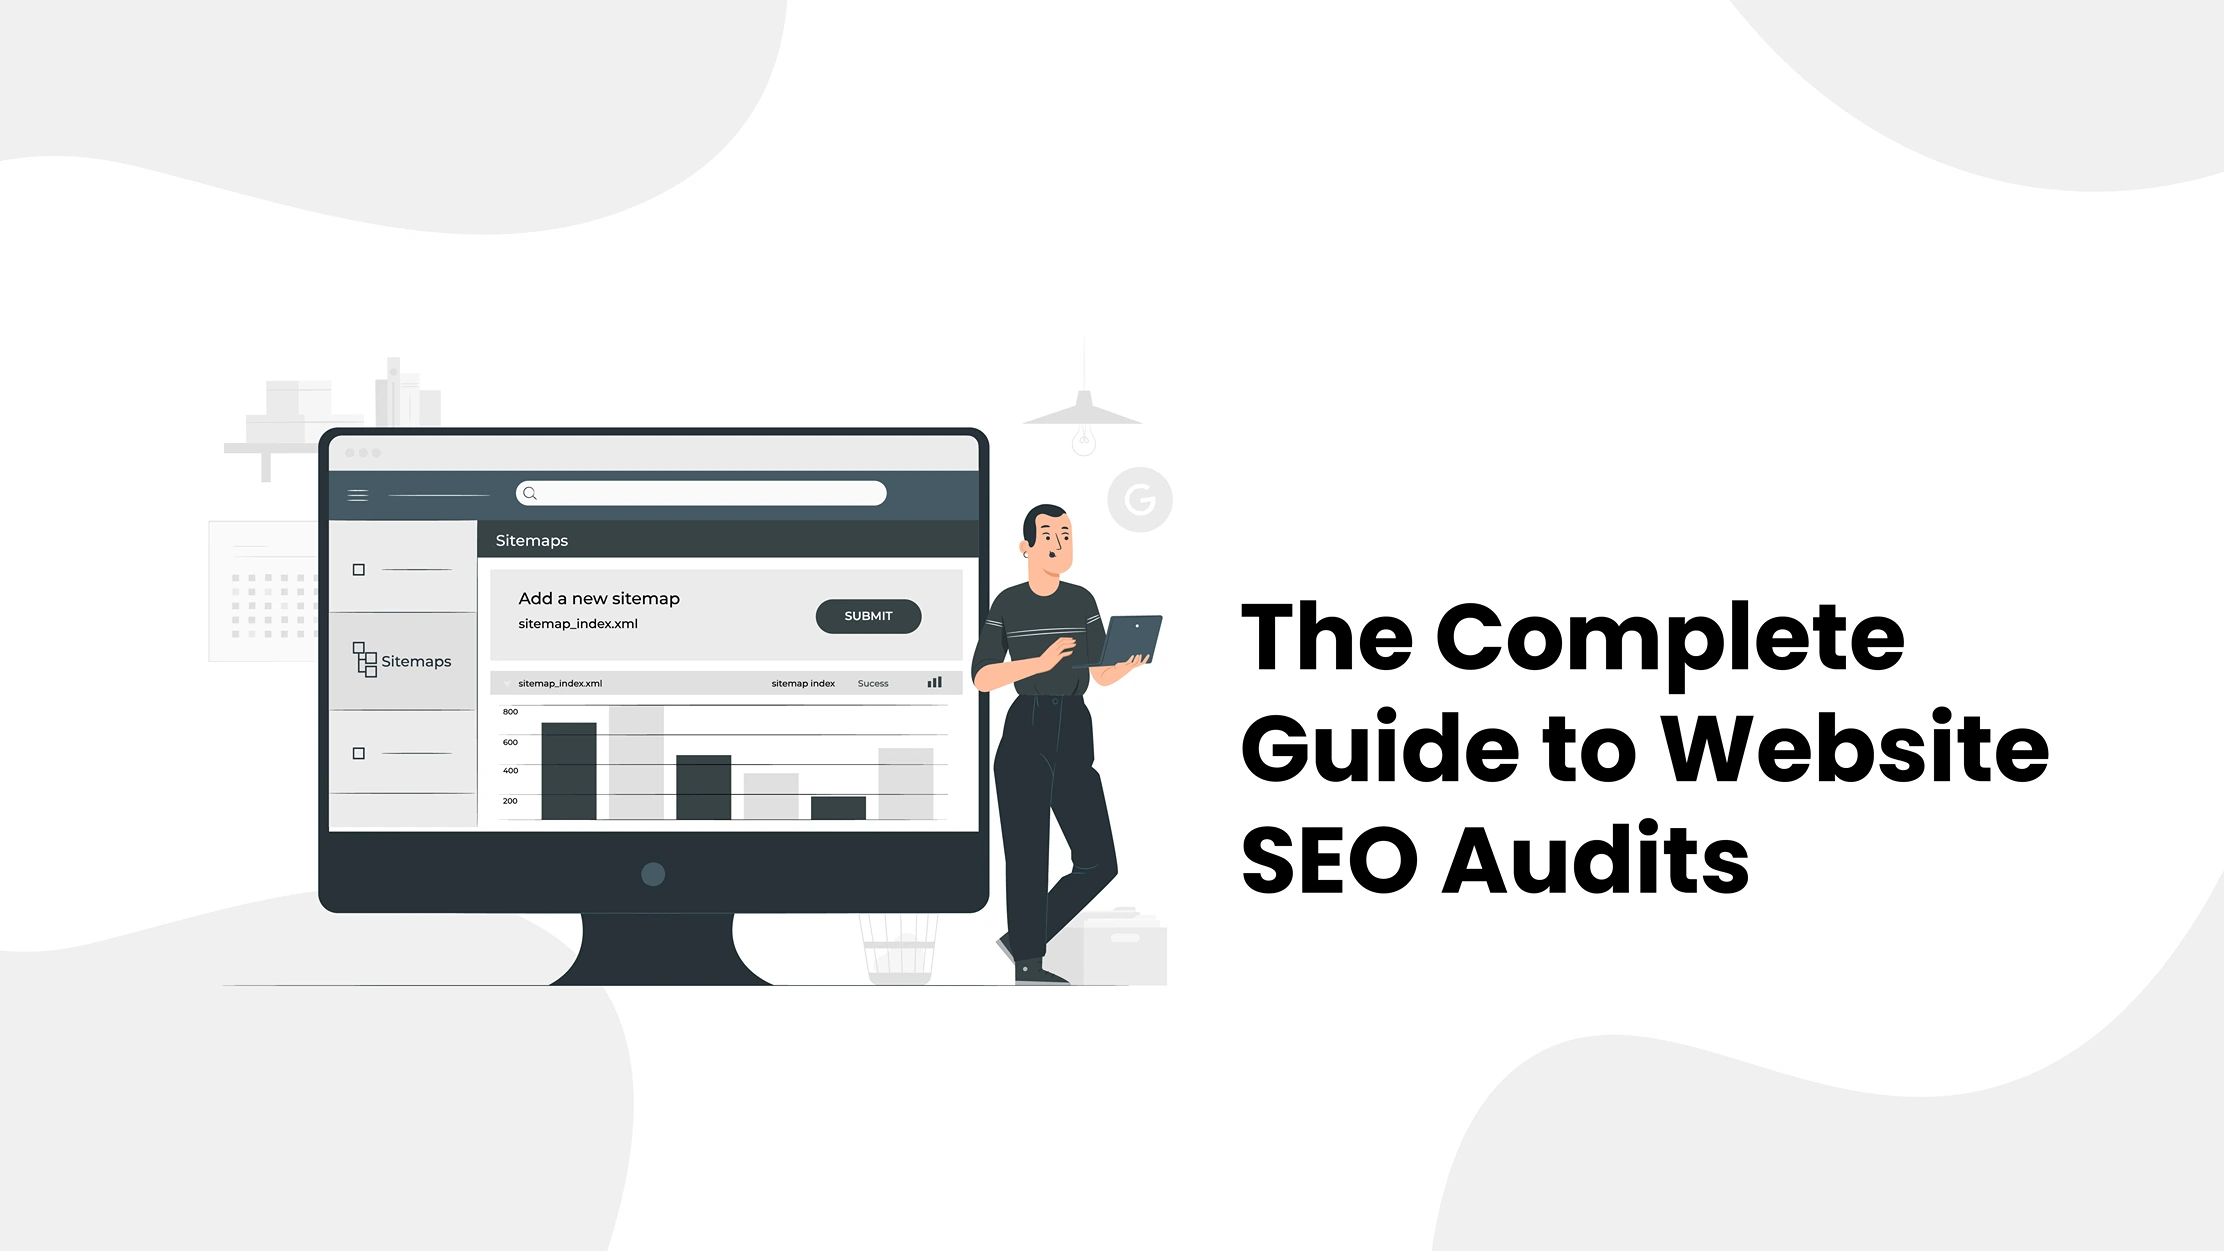 The Complete Guide to Website SEO Audits